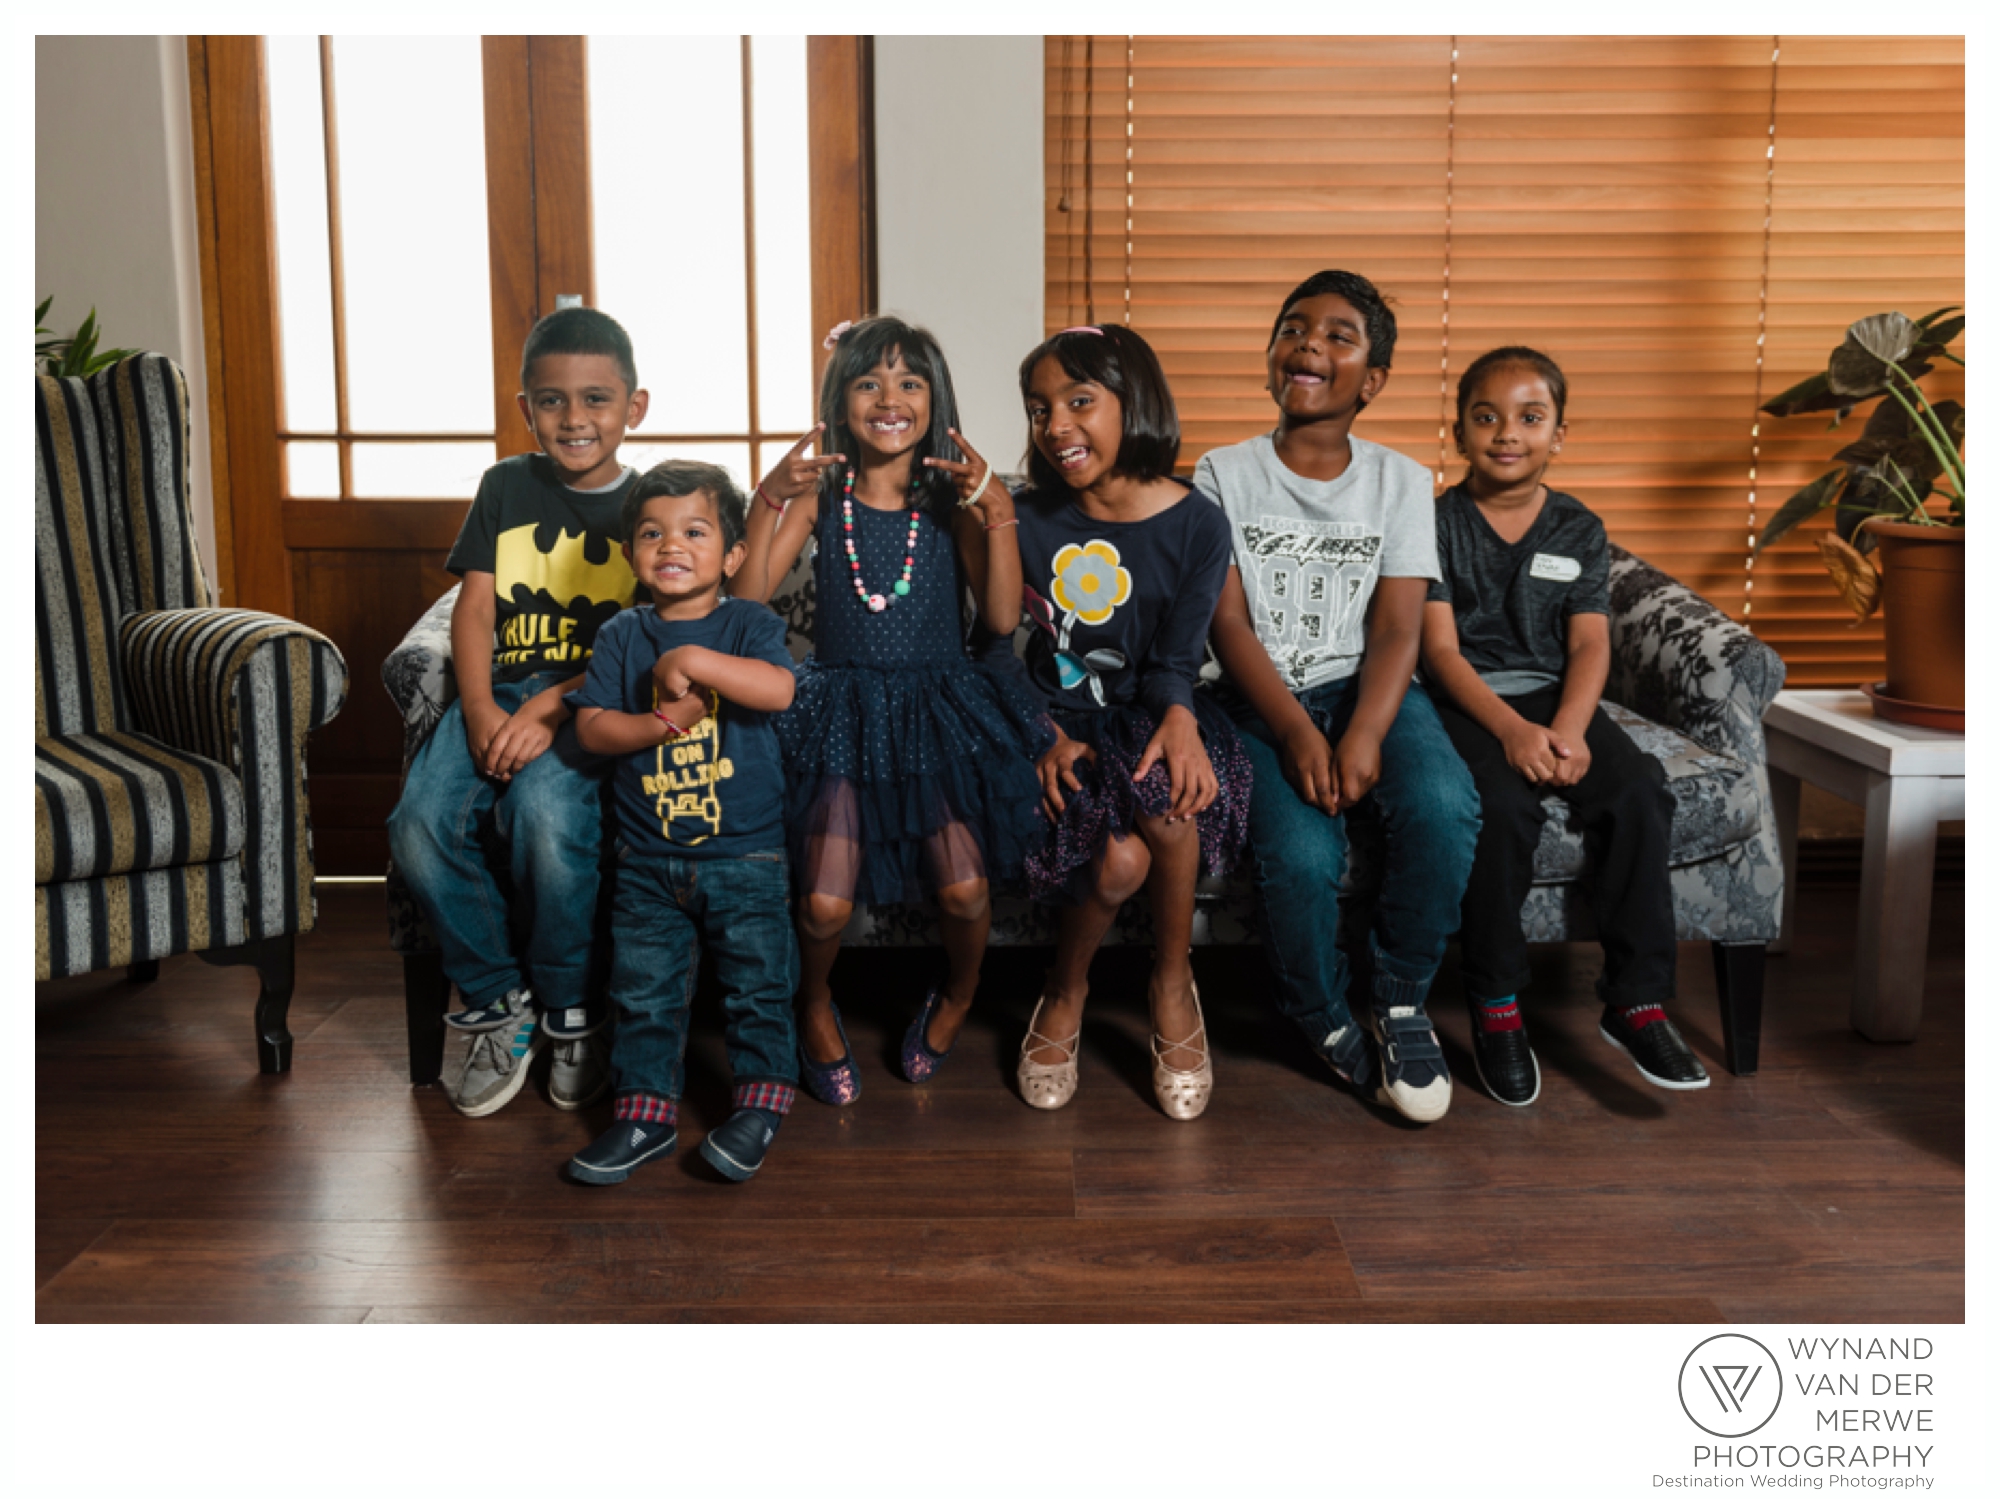   I had so much fun capturing the joy and energy of Linda and her family. Family photography on location, oh what fun.  